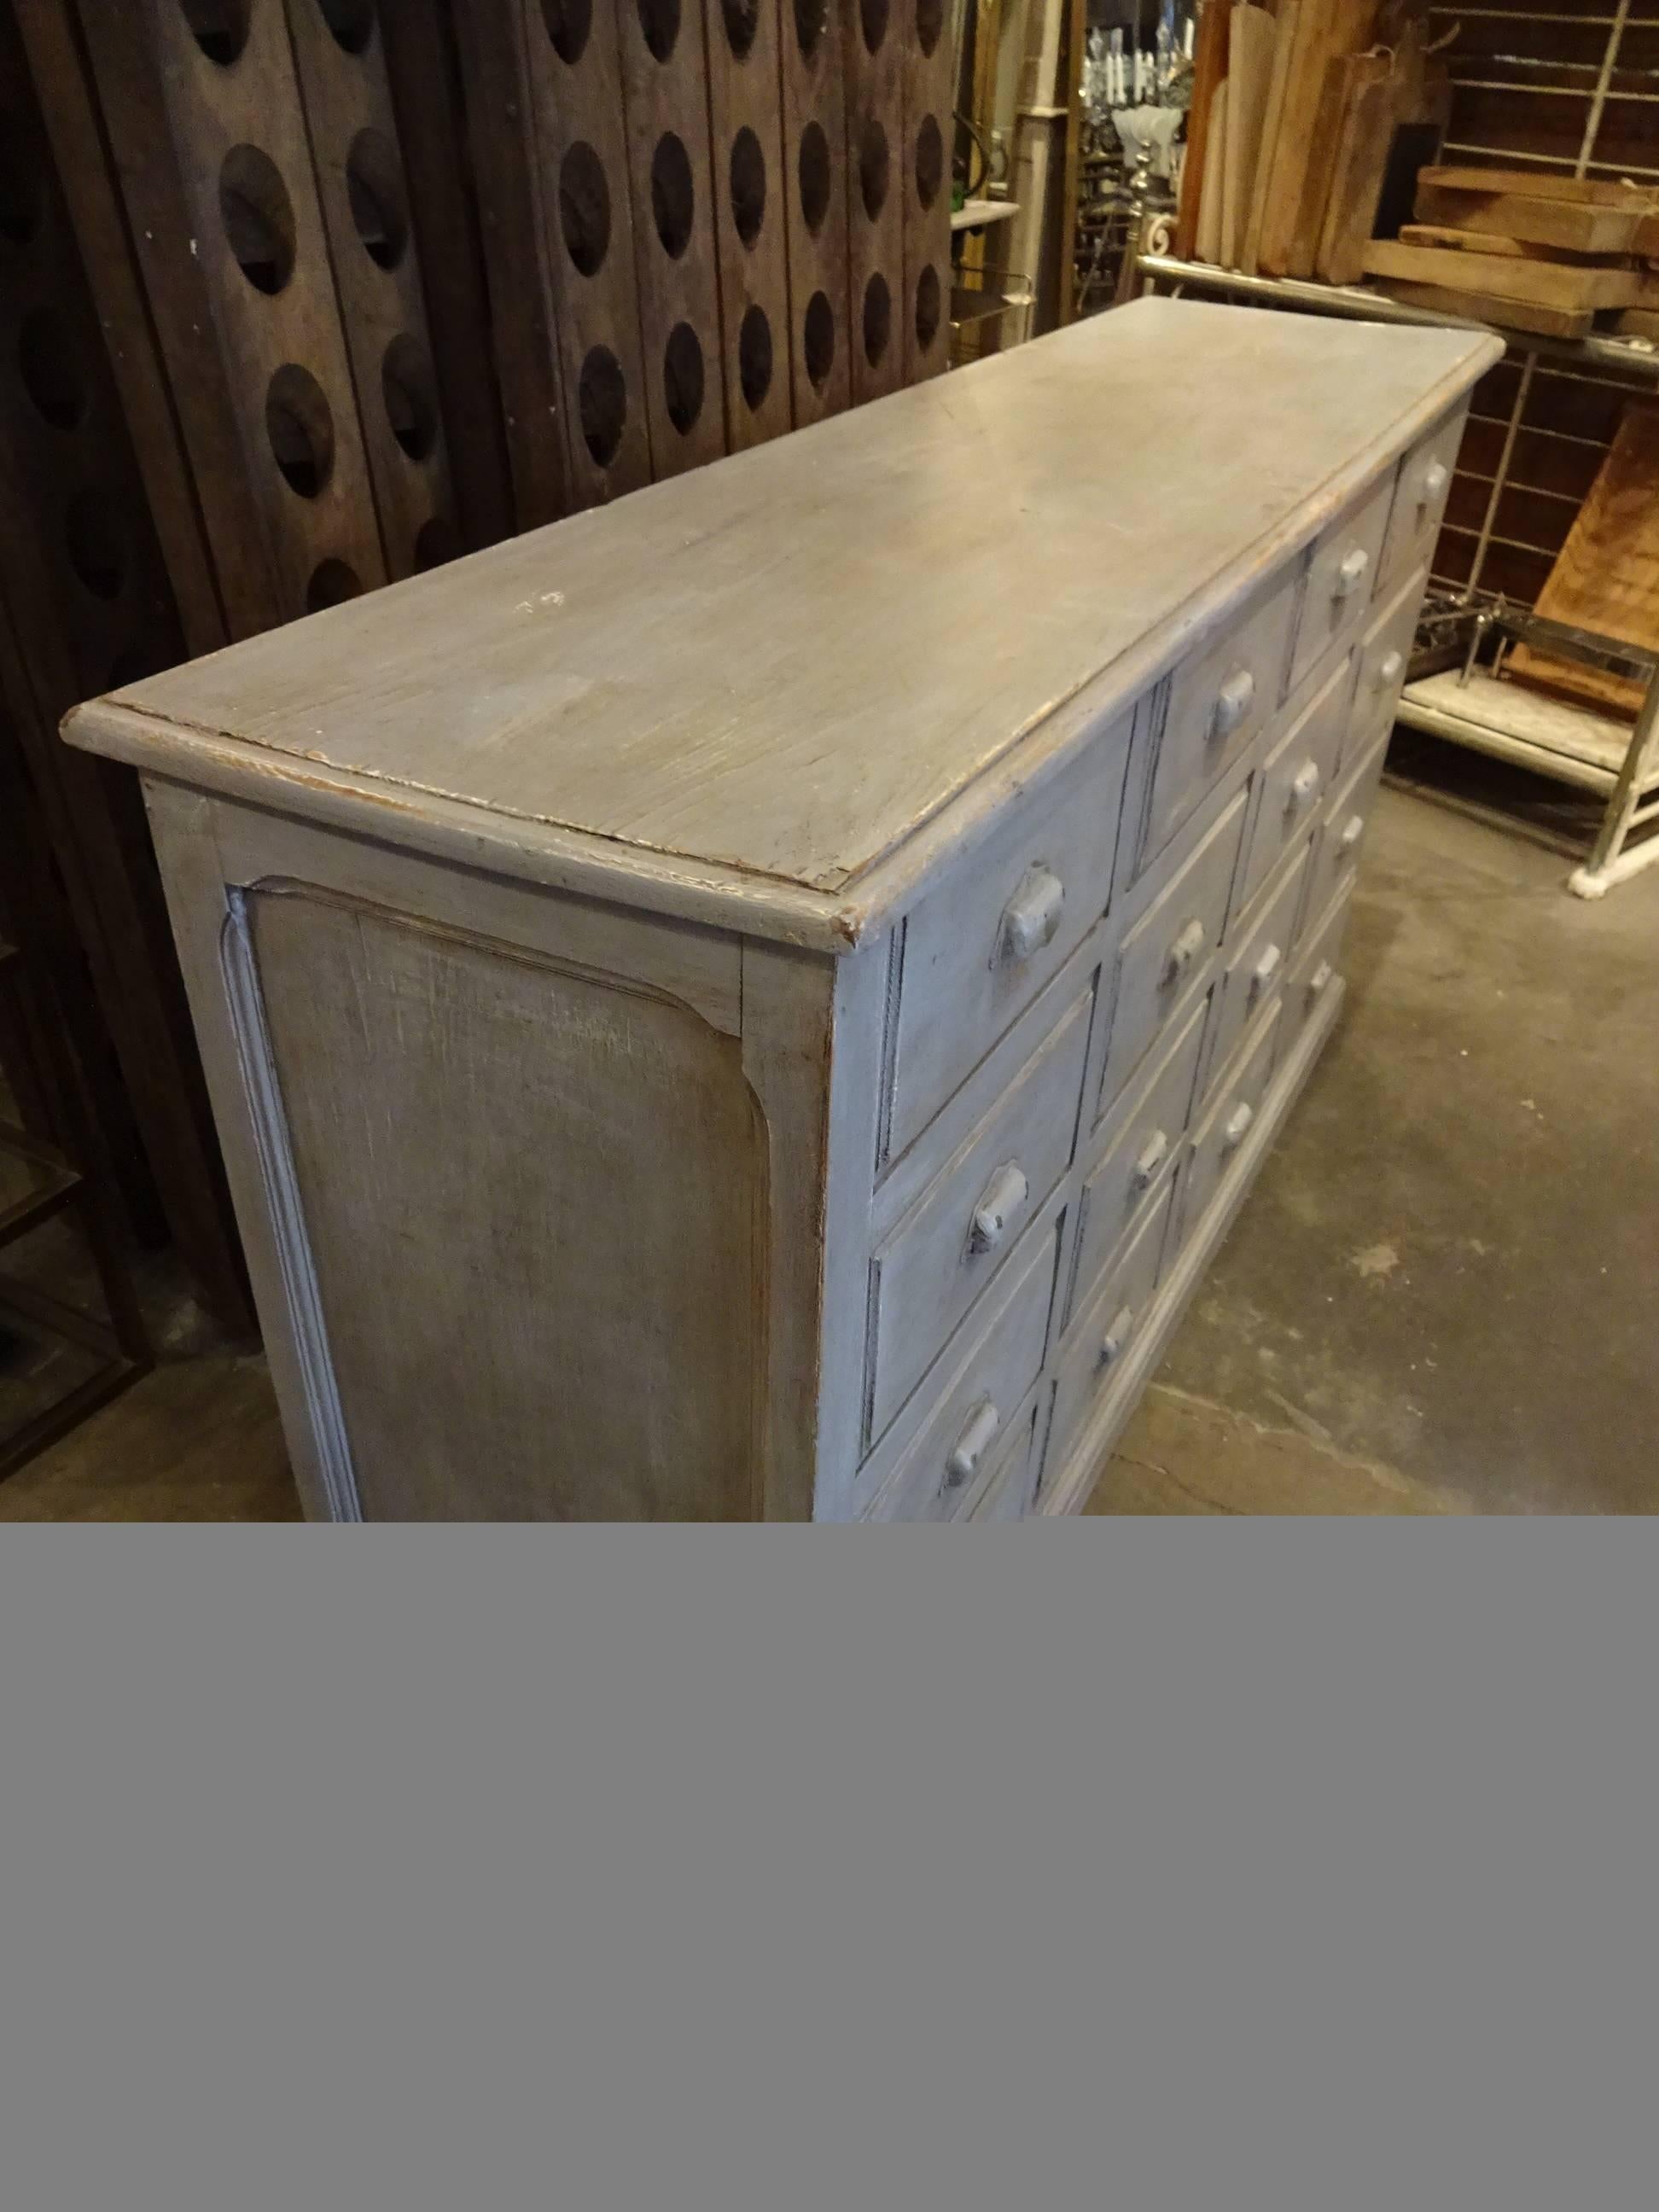 Very handsome wooden chest of drawers from France, with elegant gray look. This piece has 16 large drawers, each with beautiful iron grips. An ideal piece of furniture for storage, or alternatively as a lovely console table.

  